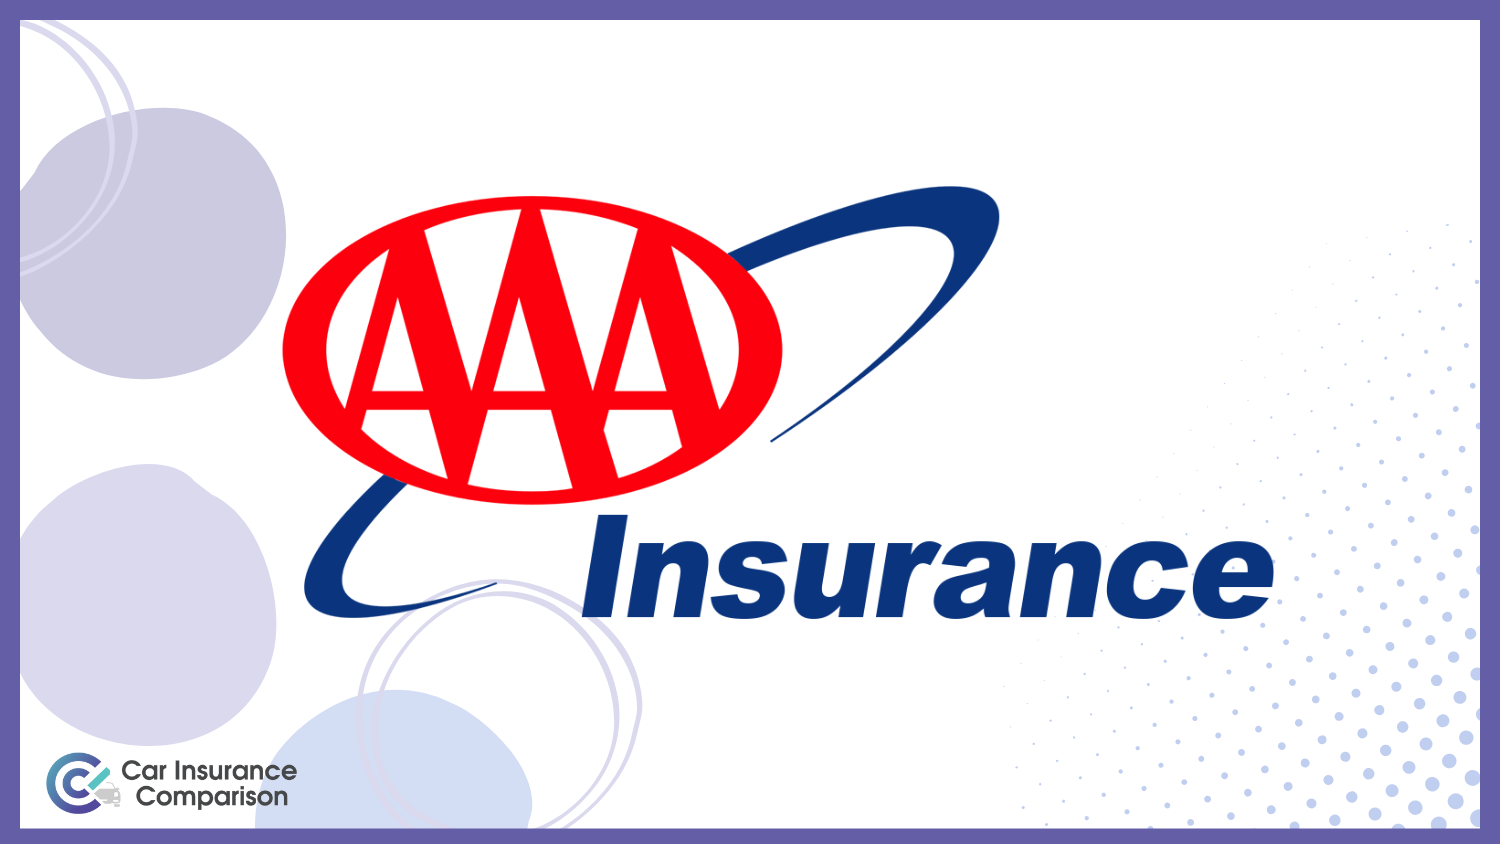 AAA: Best Car Insurance for Managers and Directors